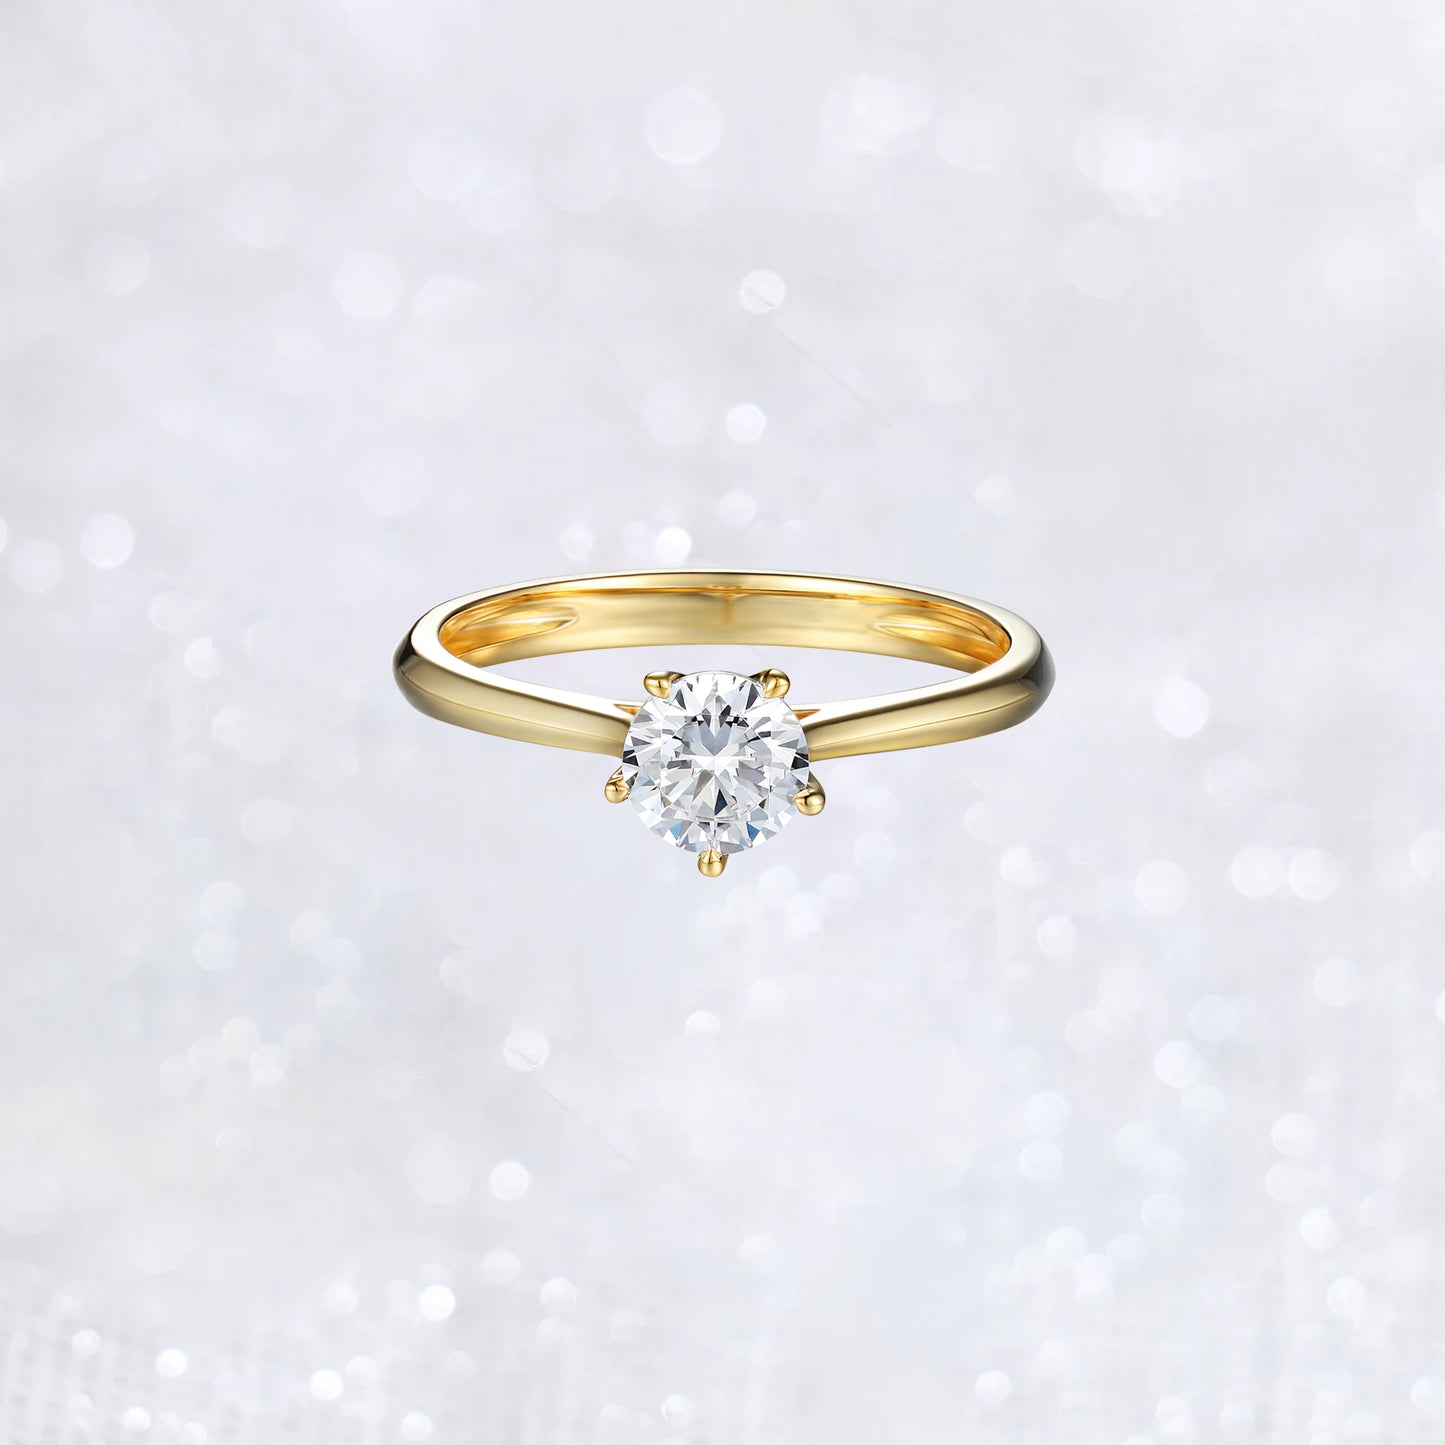 Elegant 14K Yellow Gold Solitaire Ring